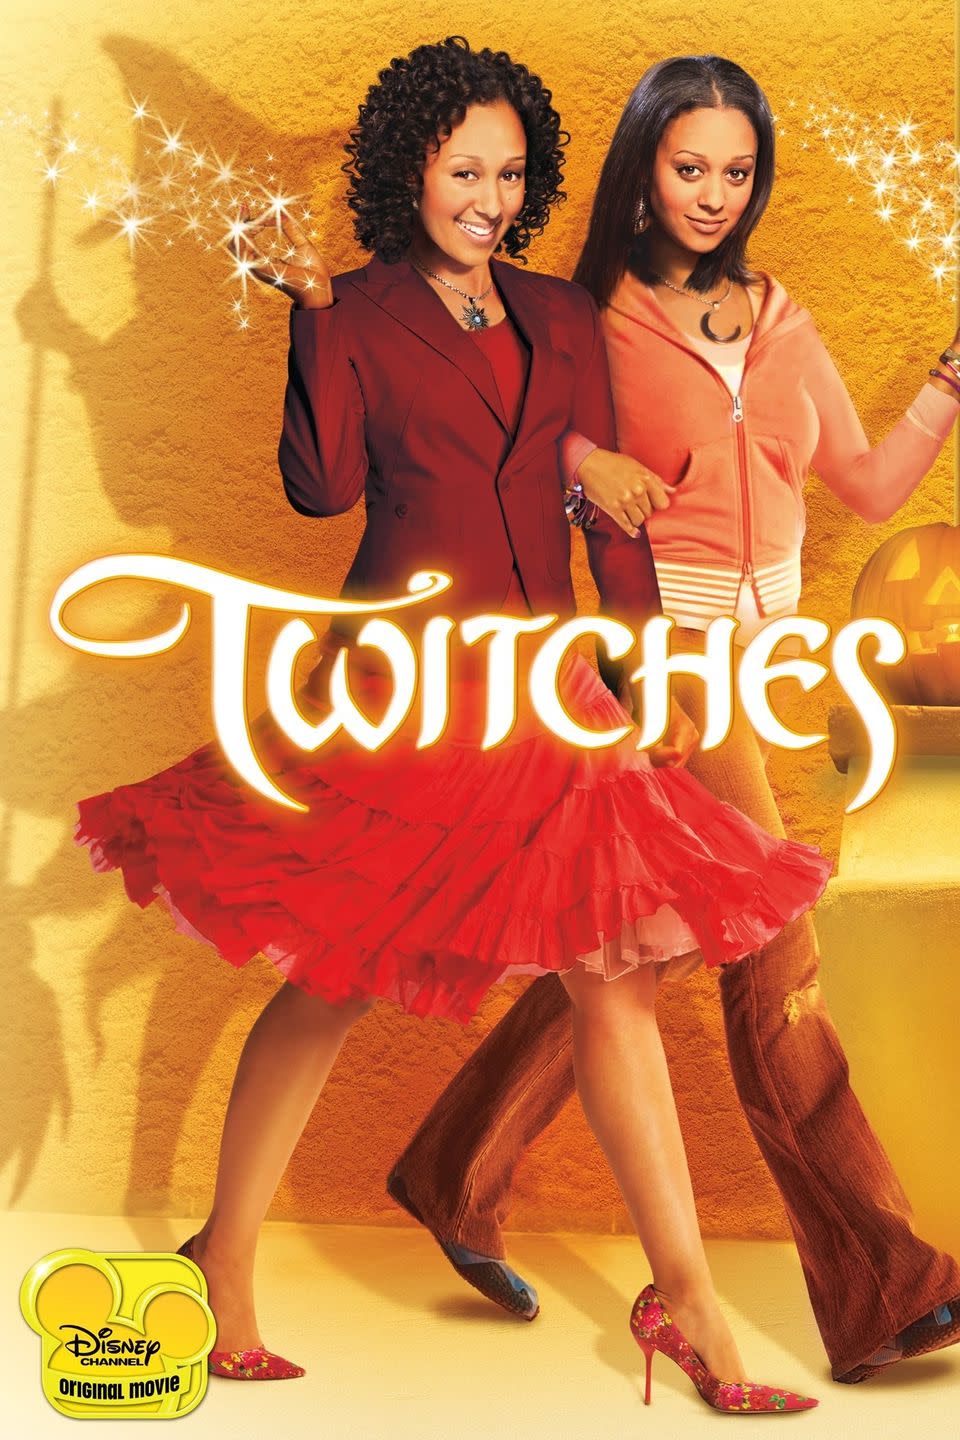 44) Twitches (2005)